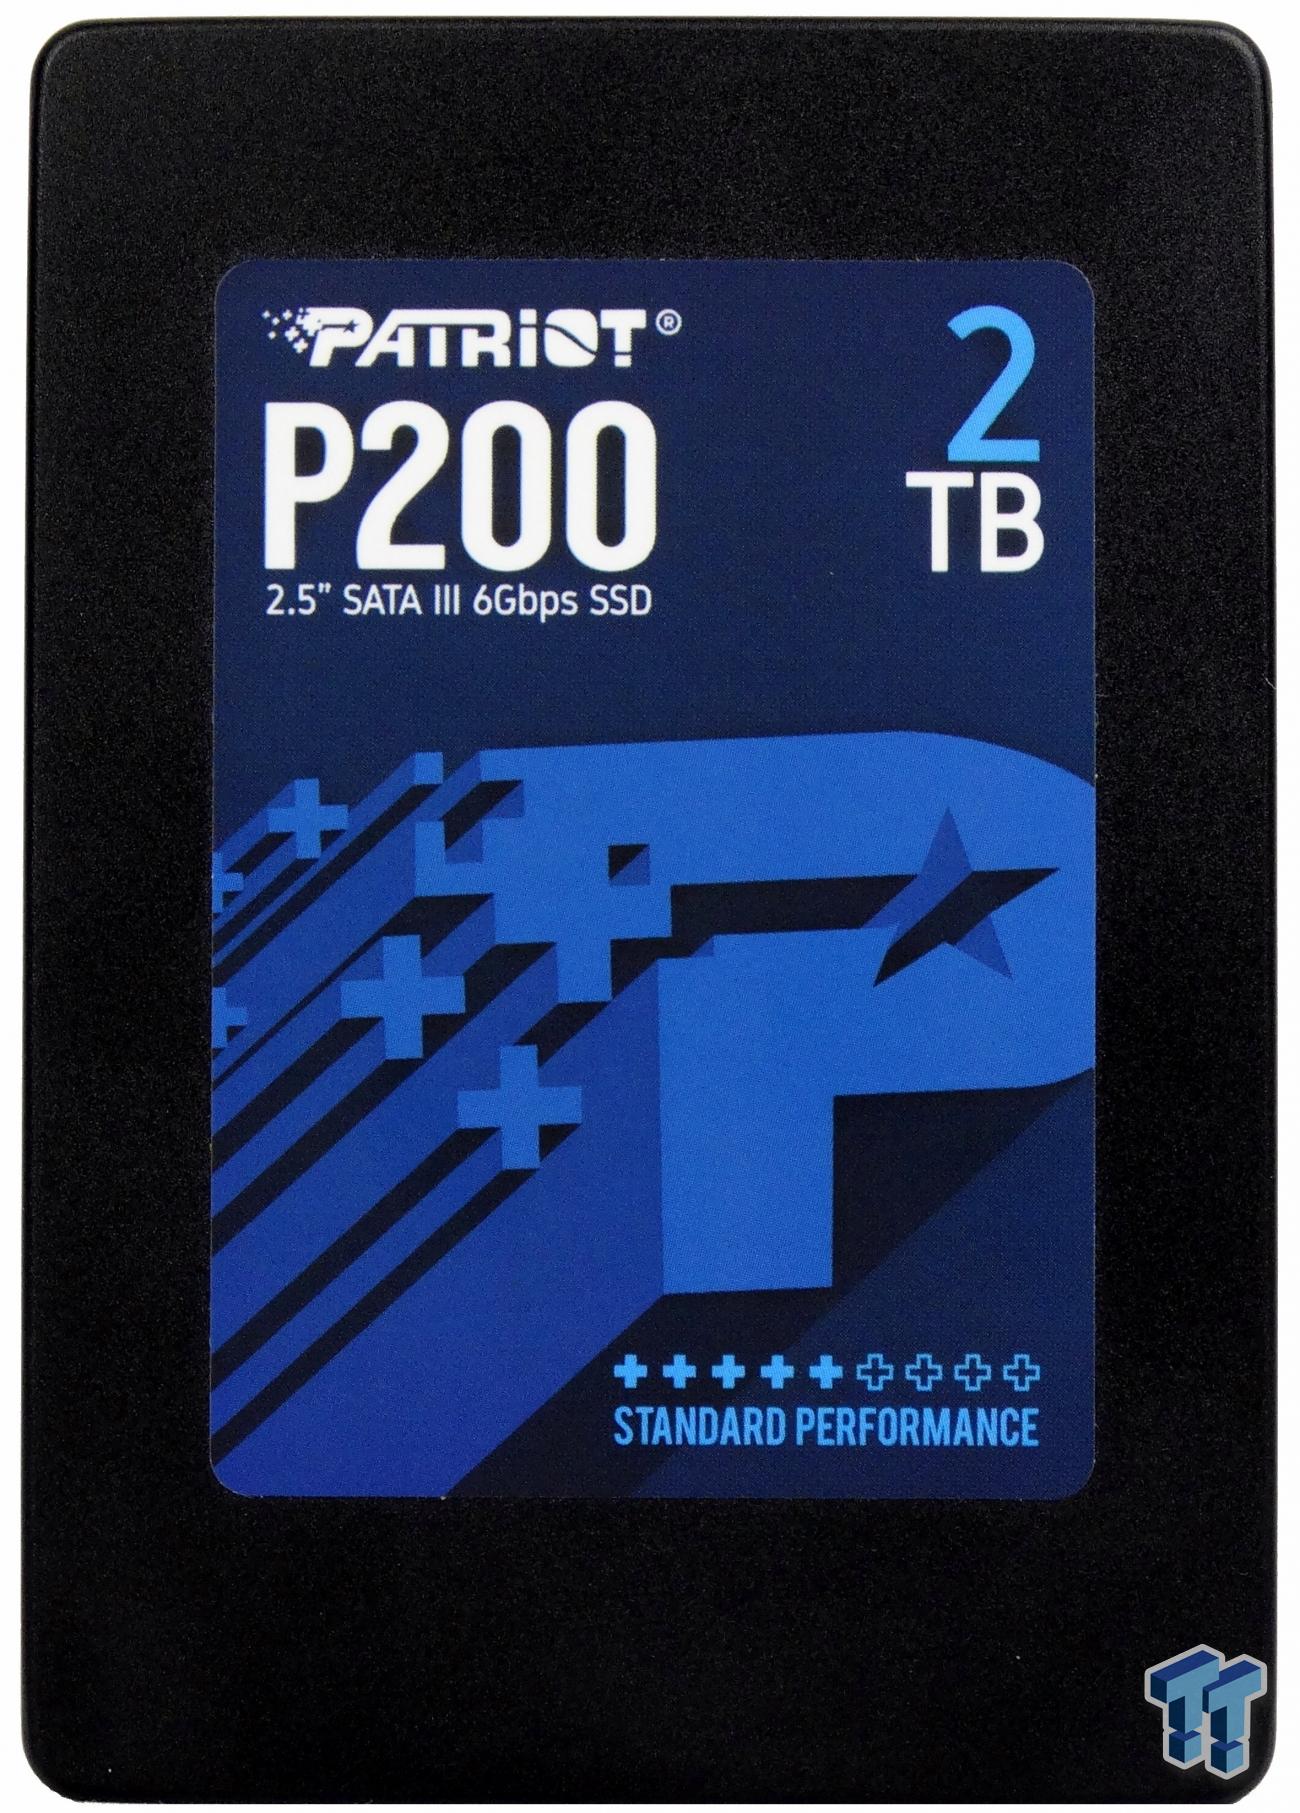 Patriot P200 2TB III SSD Review